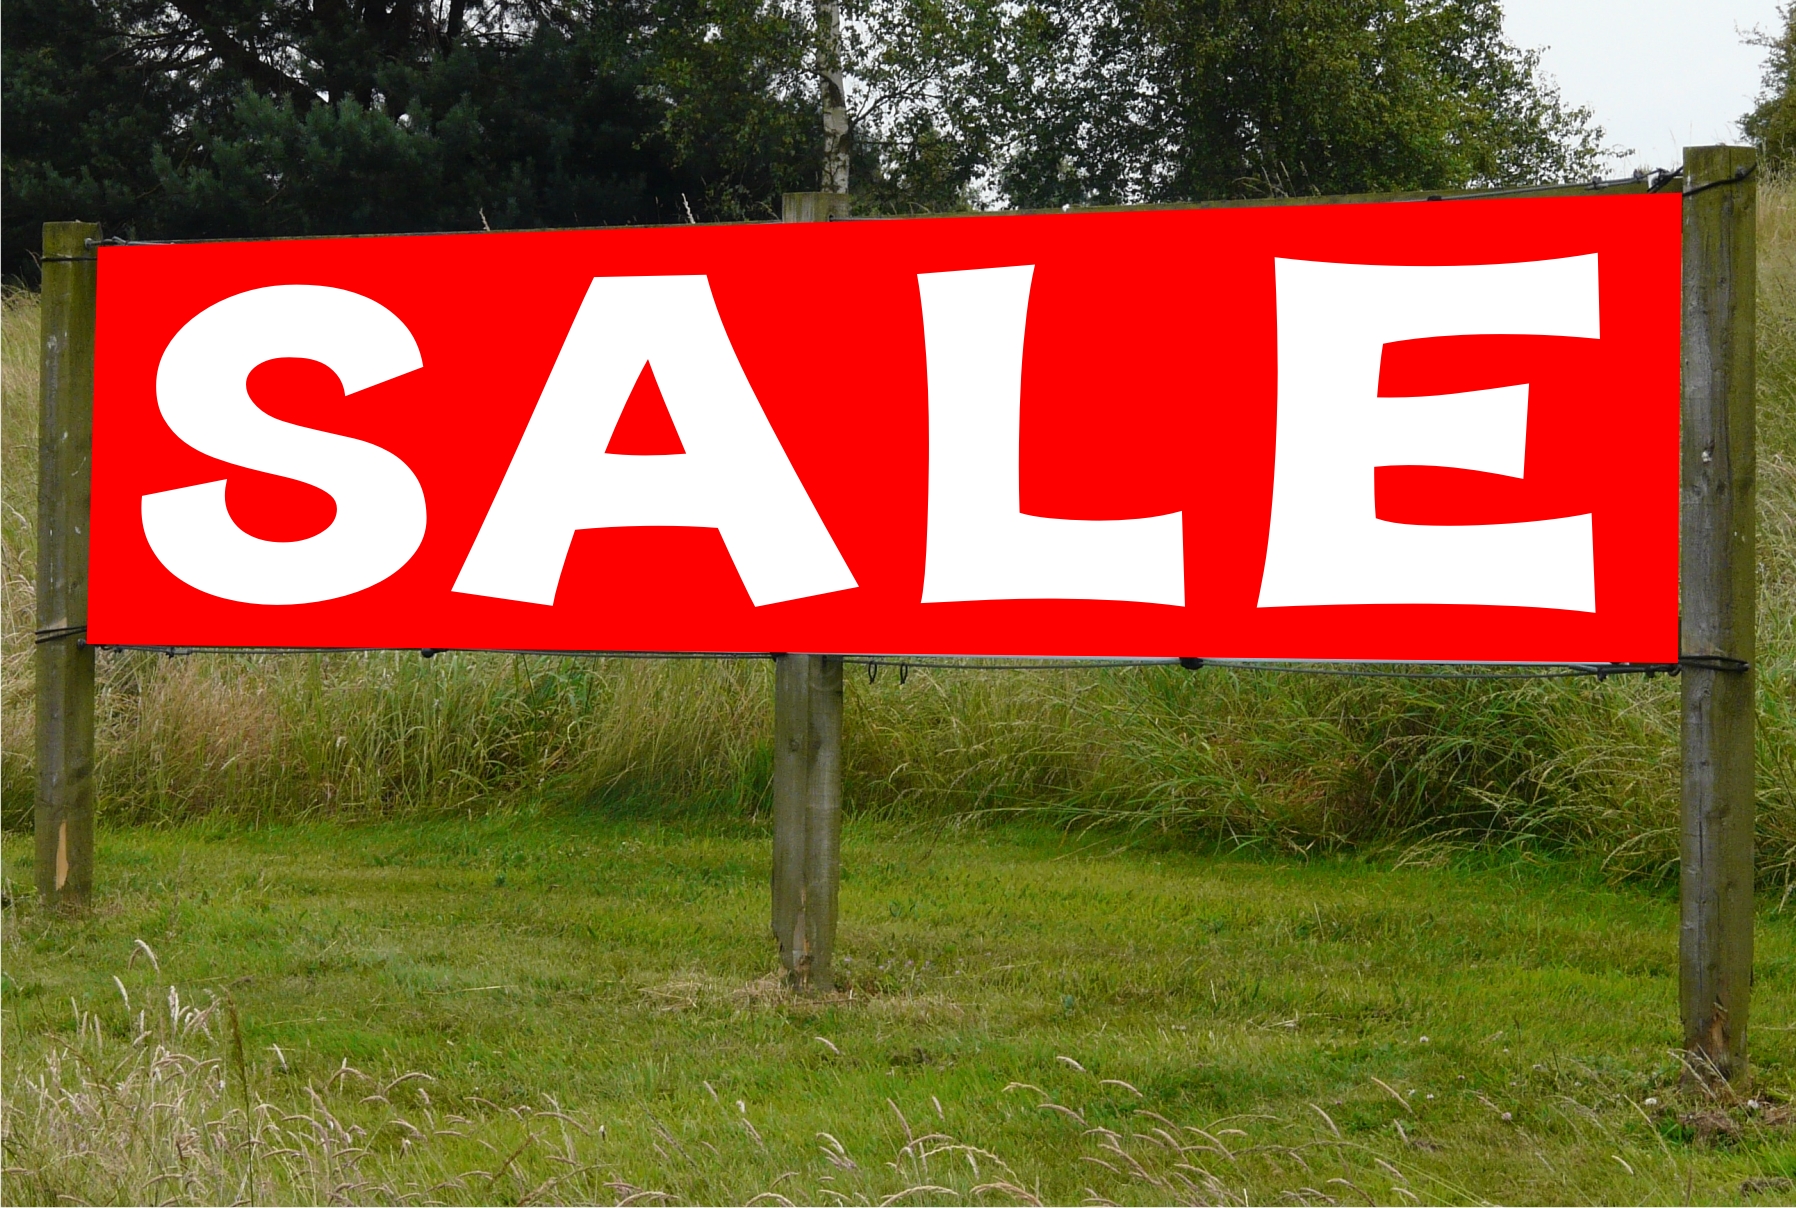 Sale pvc banner promtional item M Signs